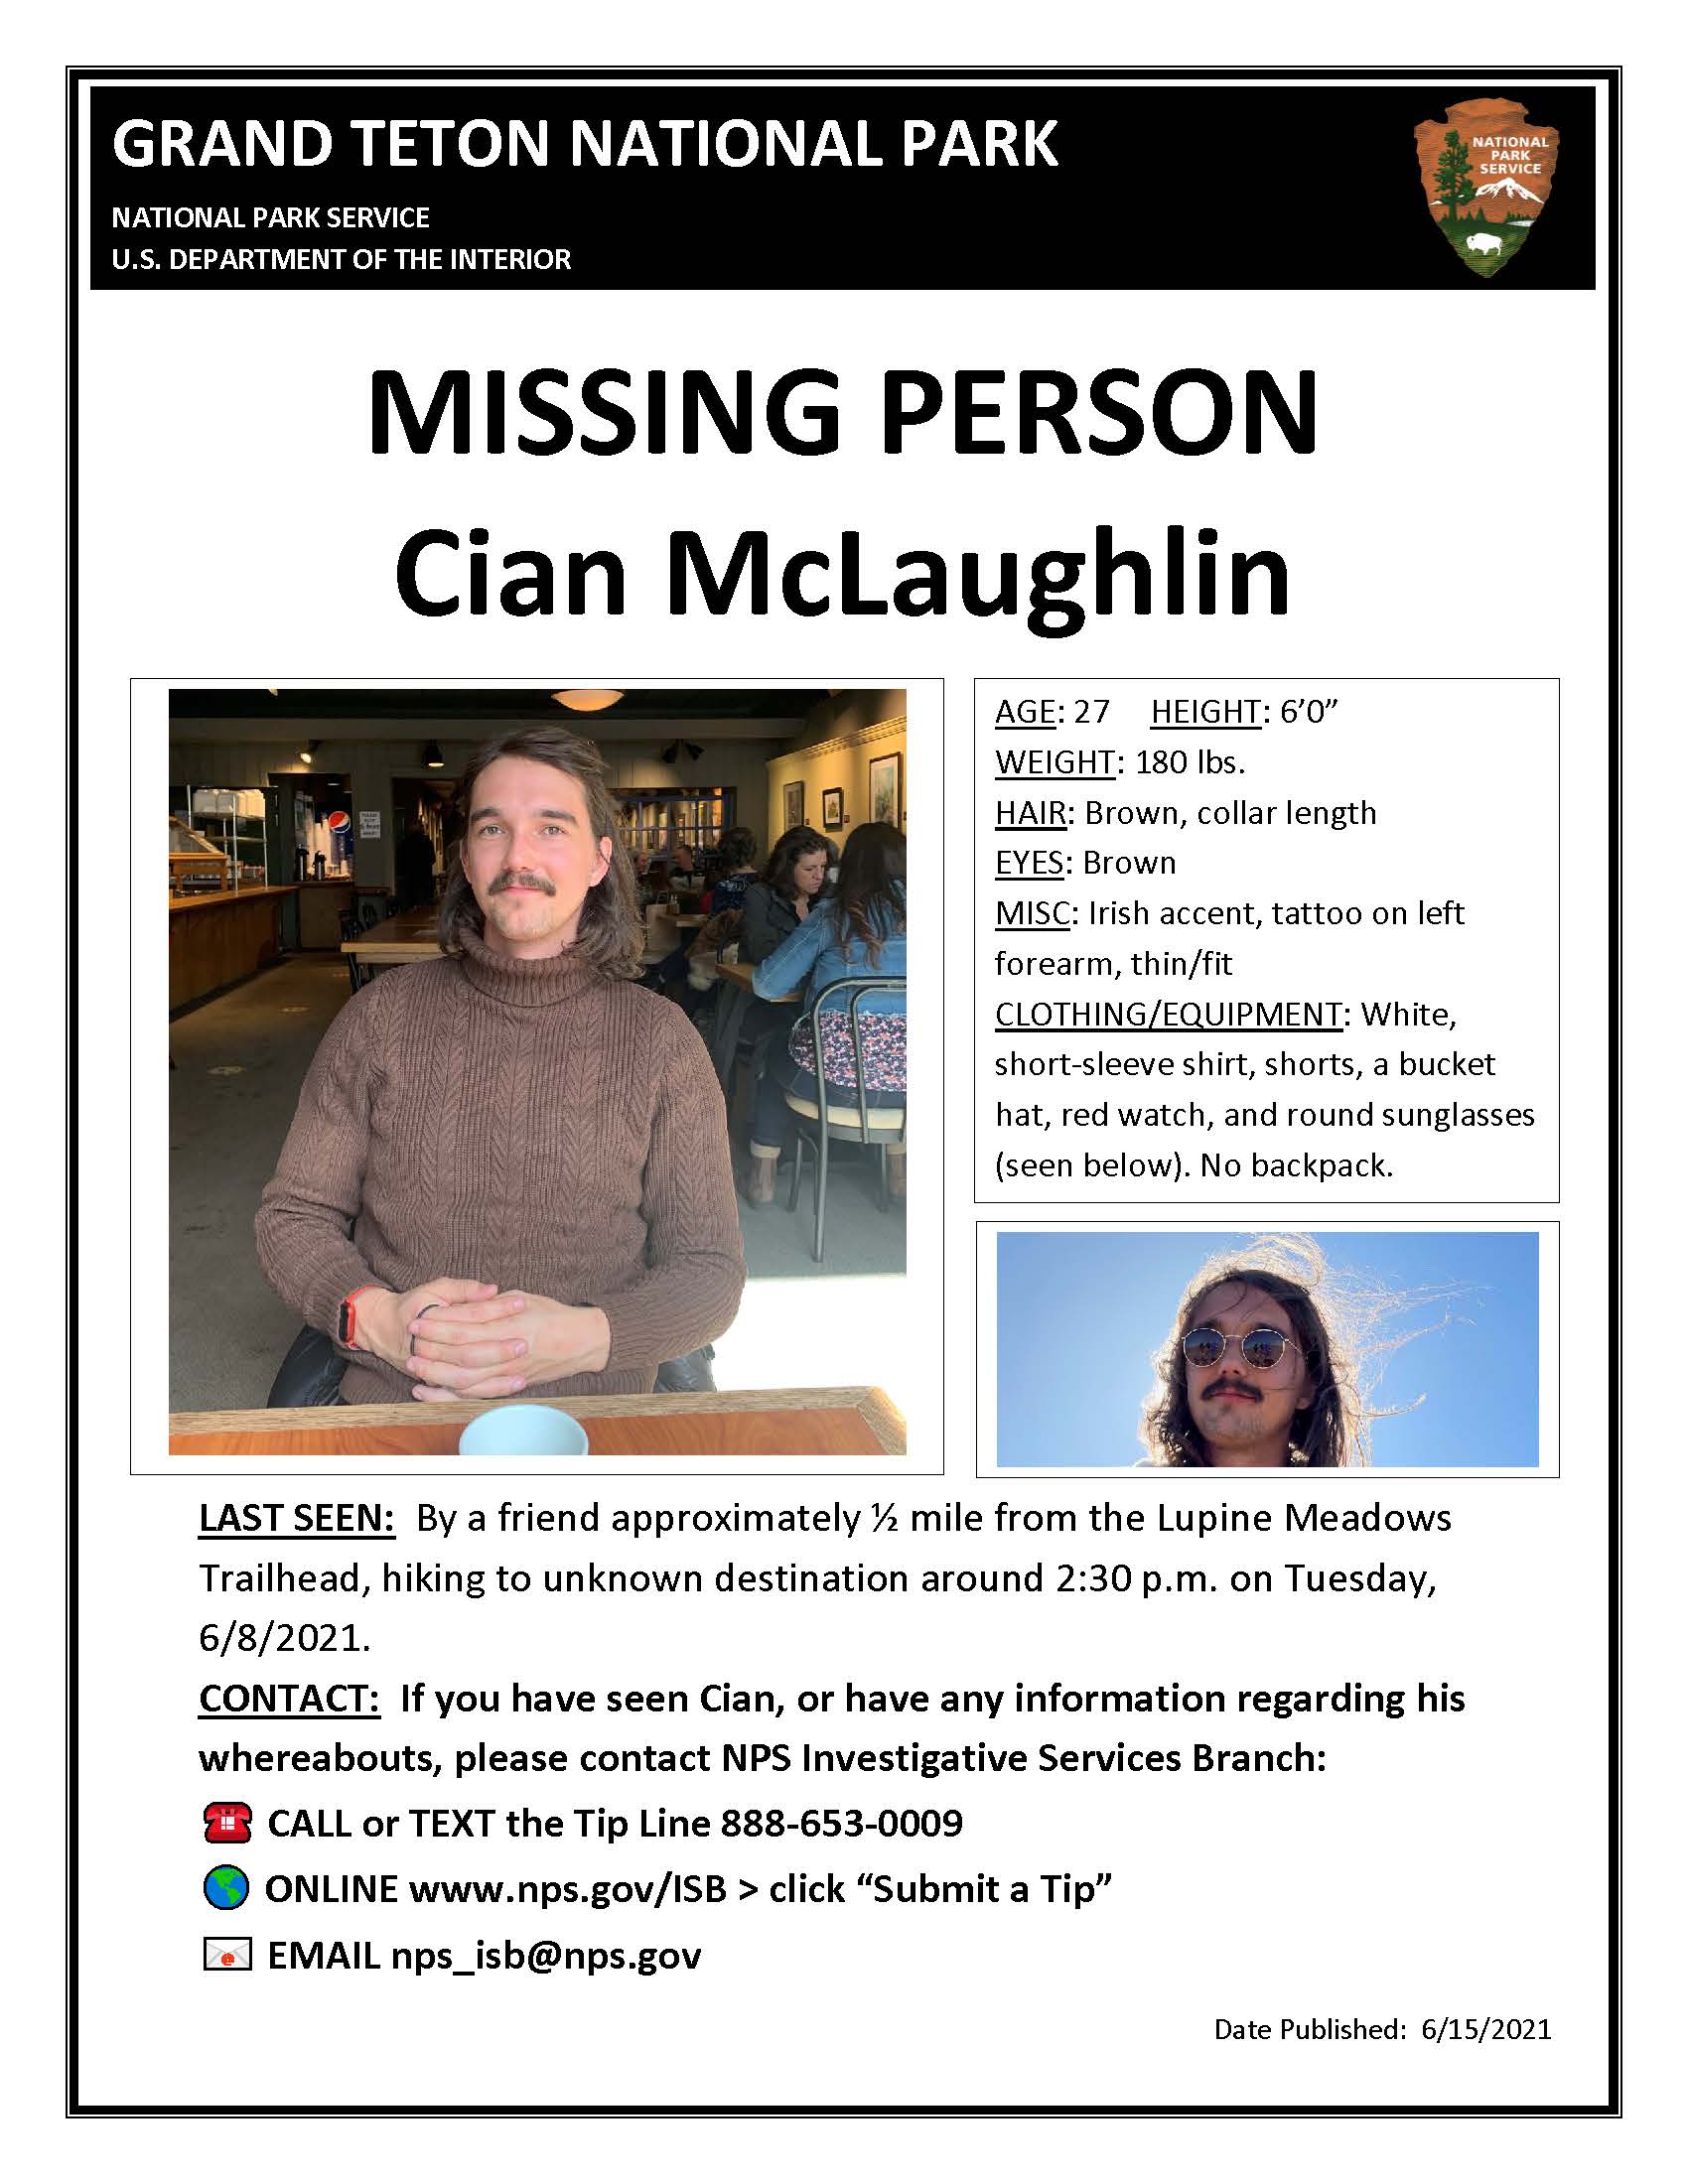 Missing person flyer Cian McLaughlin